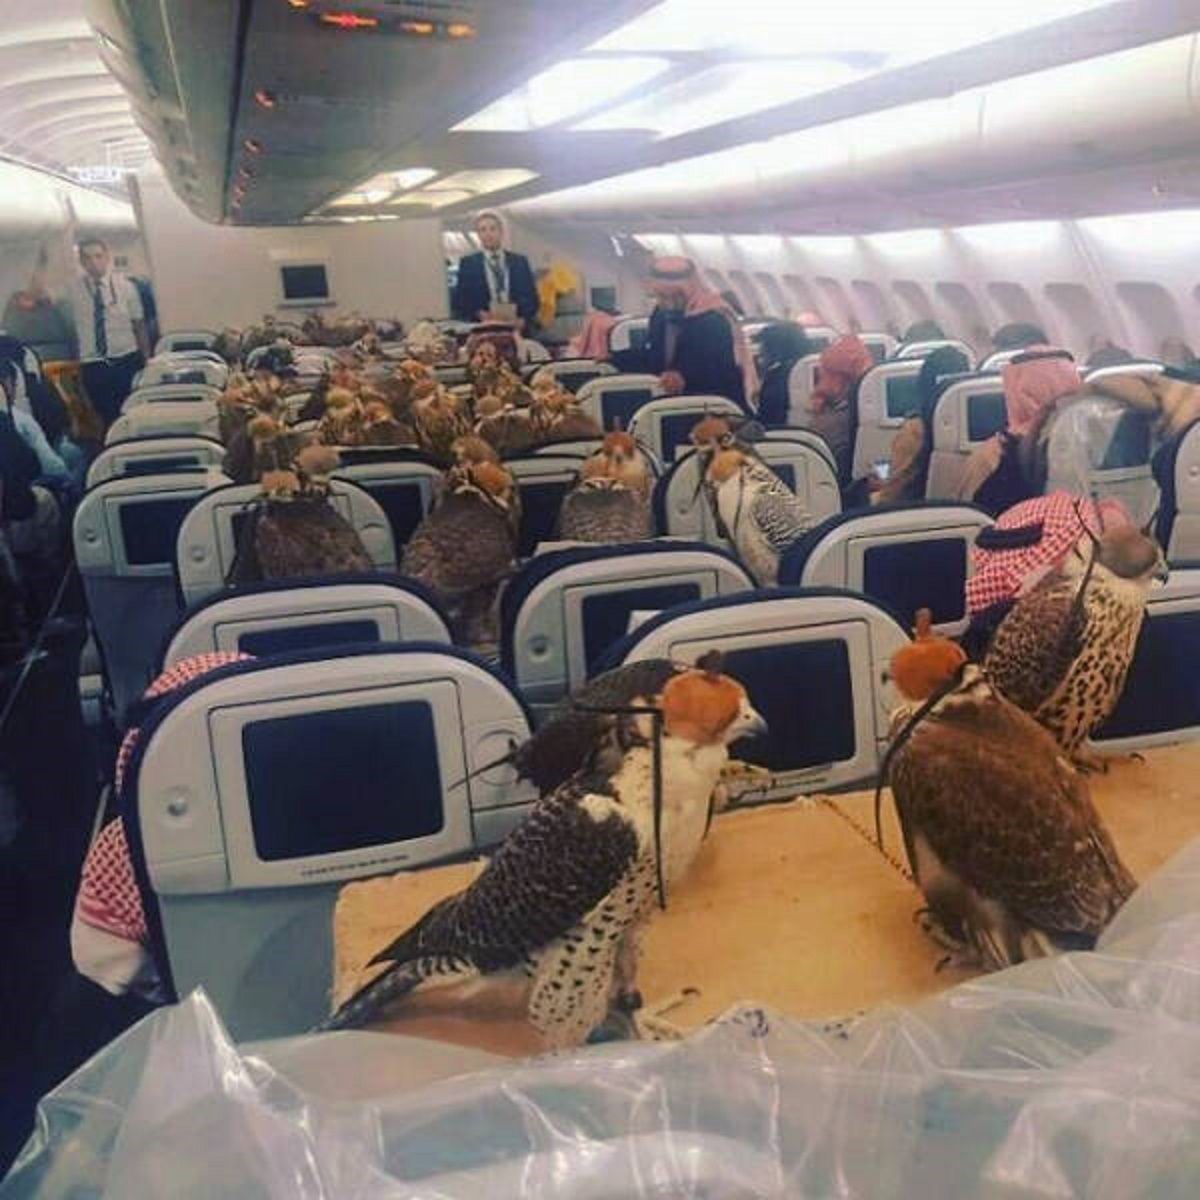 "My Captain Friend Sent Me This Photo. Saudi Prince Bought Ticket For His 80 Hawks"